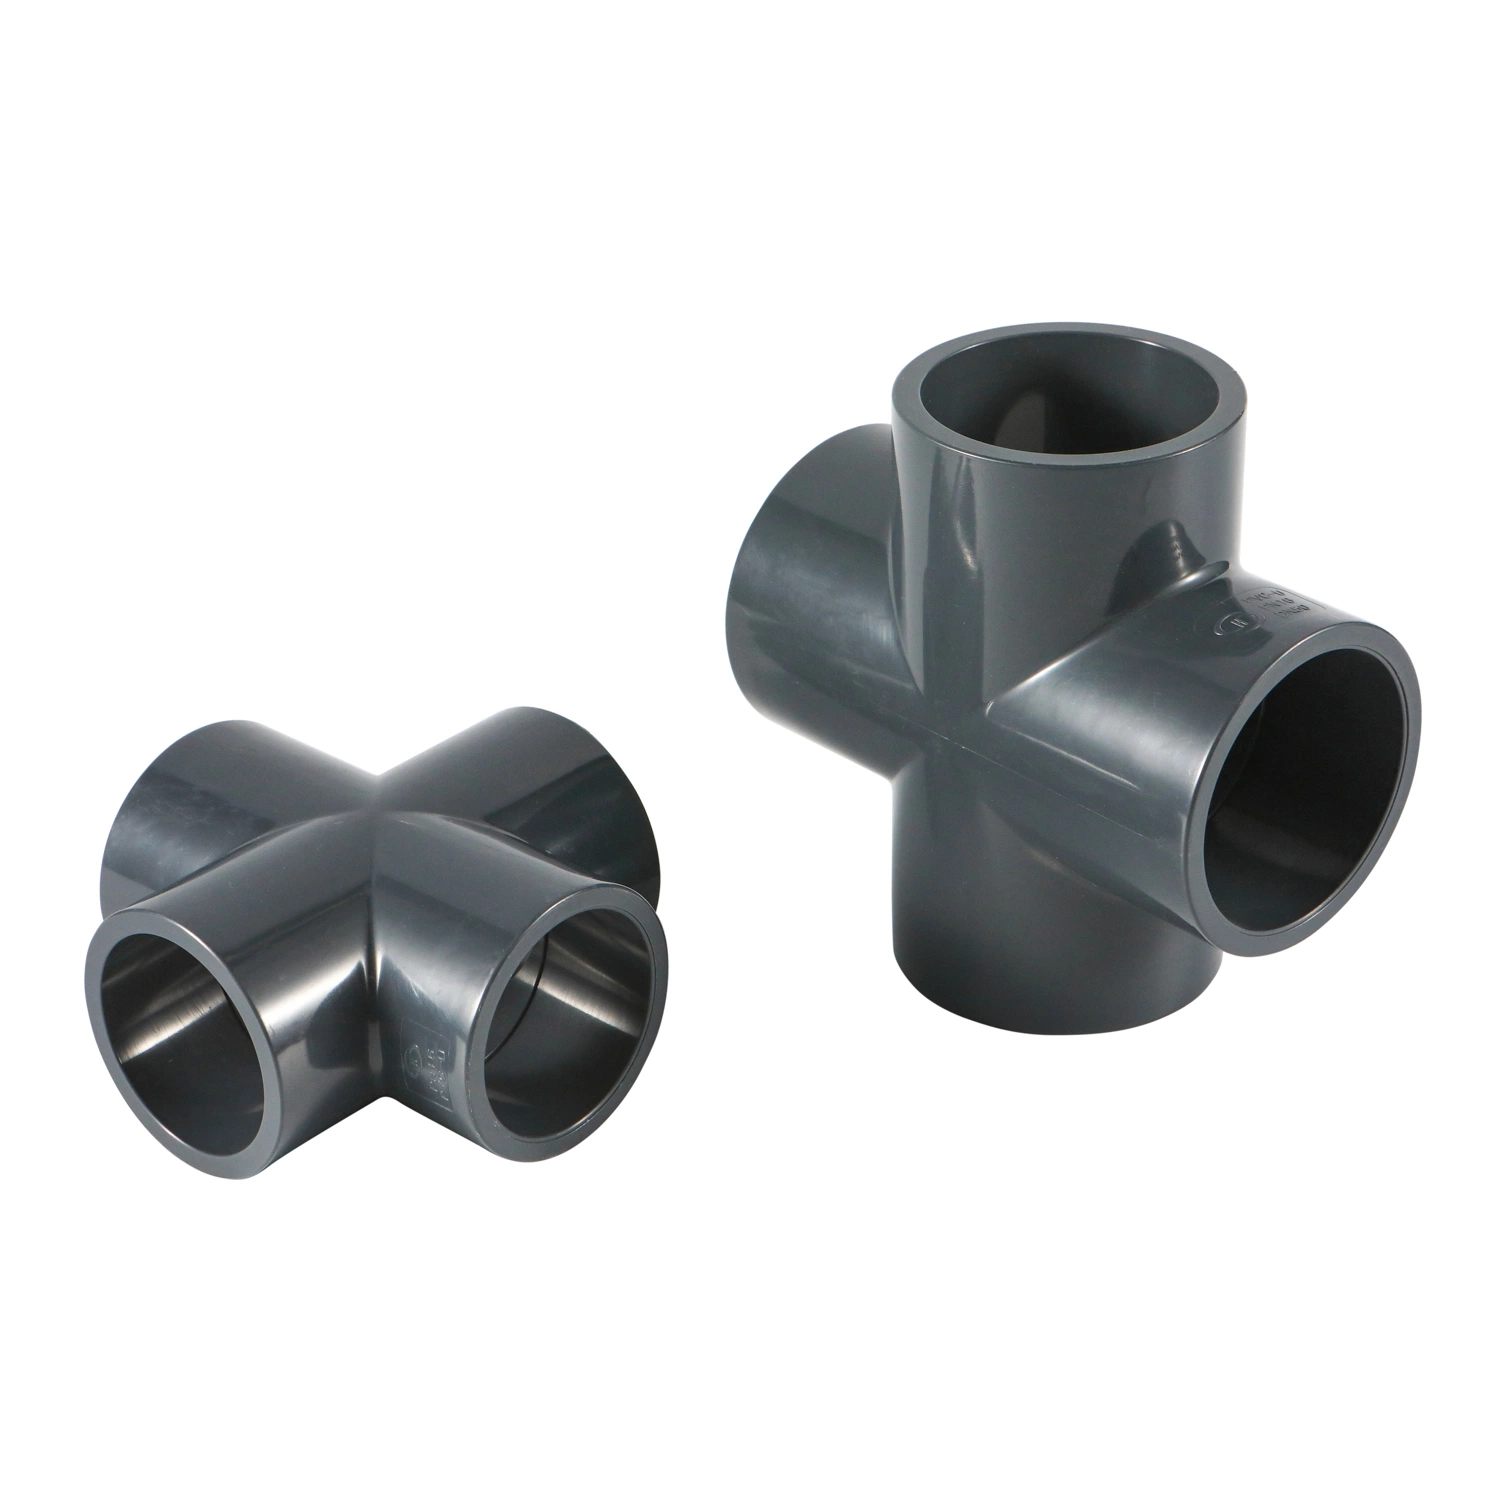 High quality/High cost performance PVC Pipe Fittings-Pn10 Standard Plastic Pipe Fitting Equal Cross for Water Supply